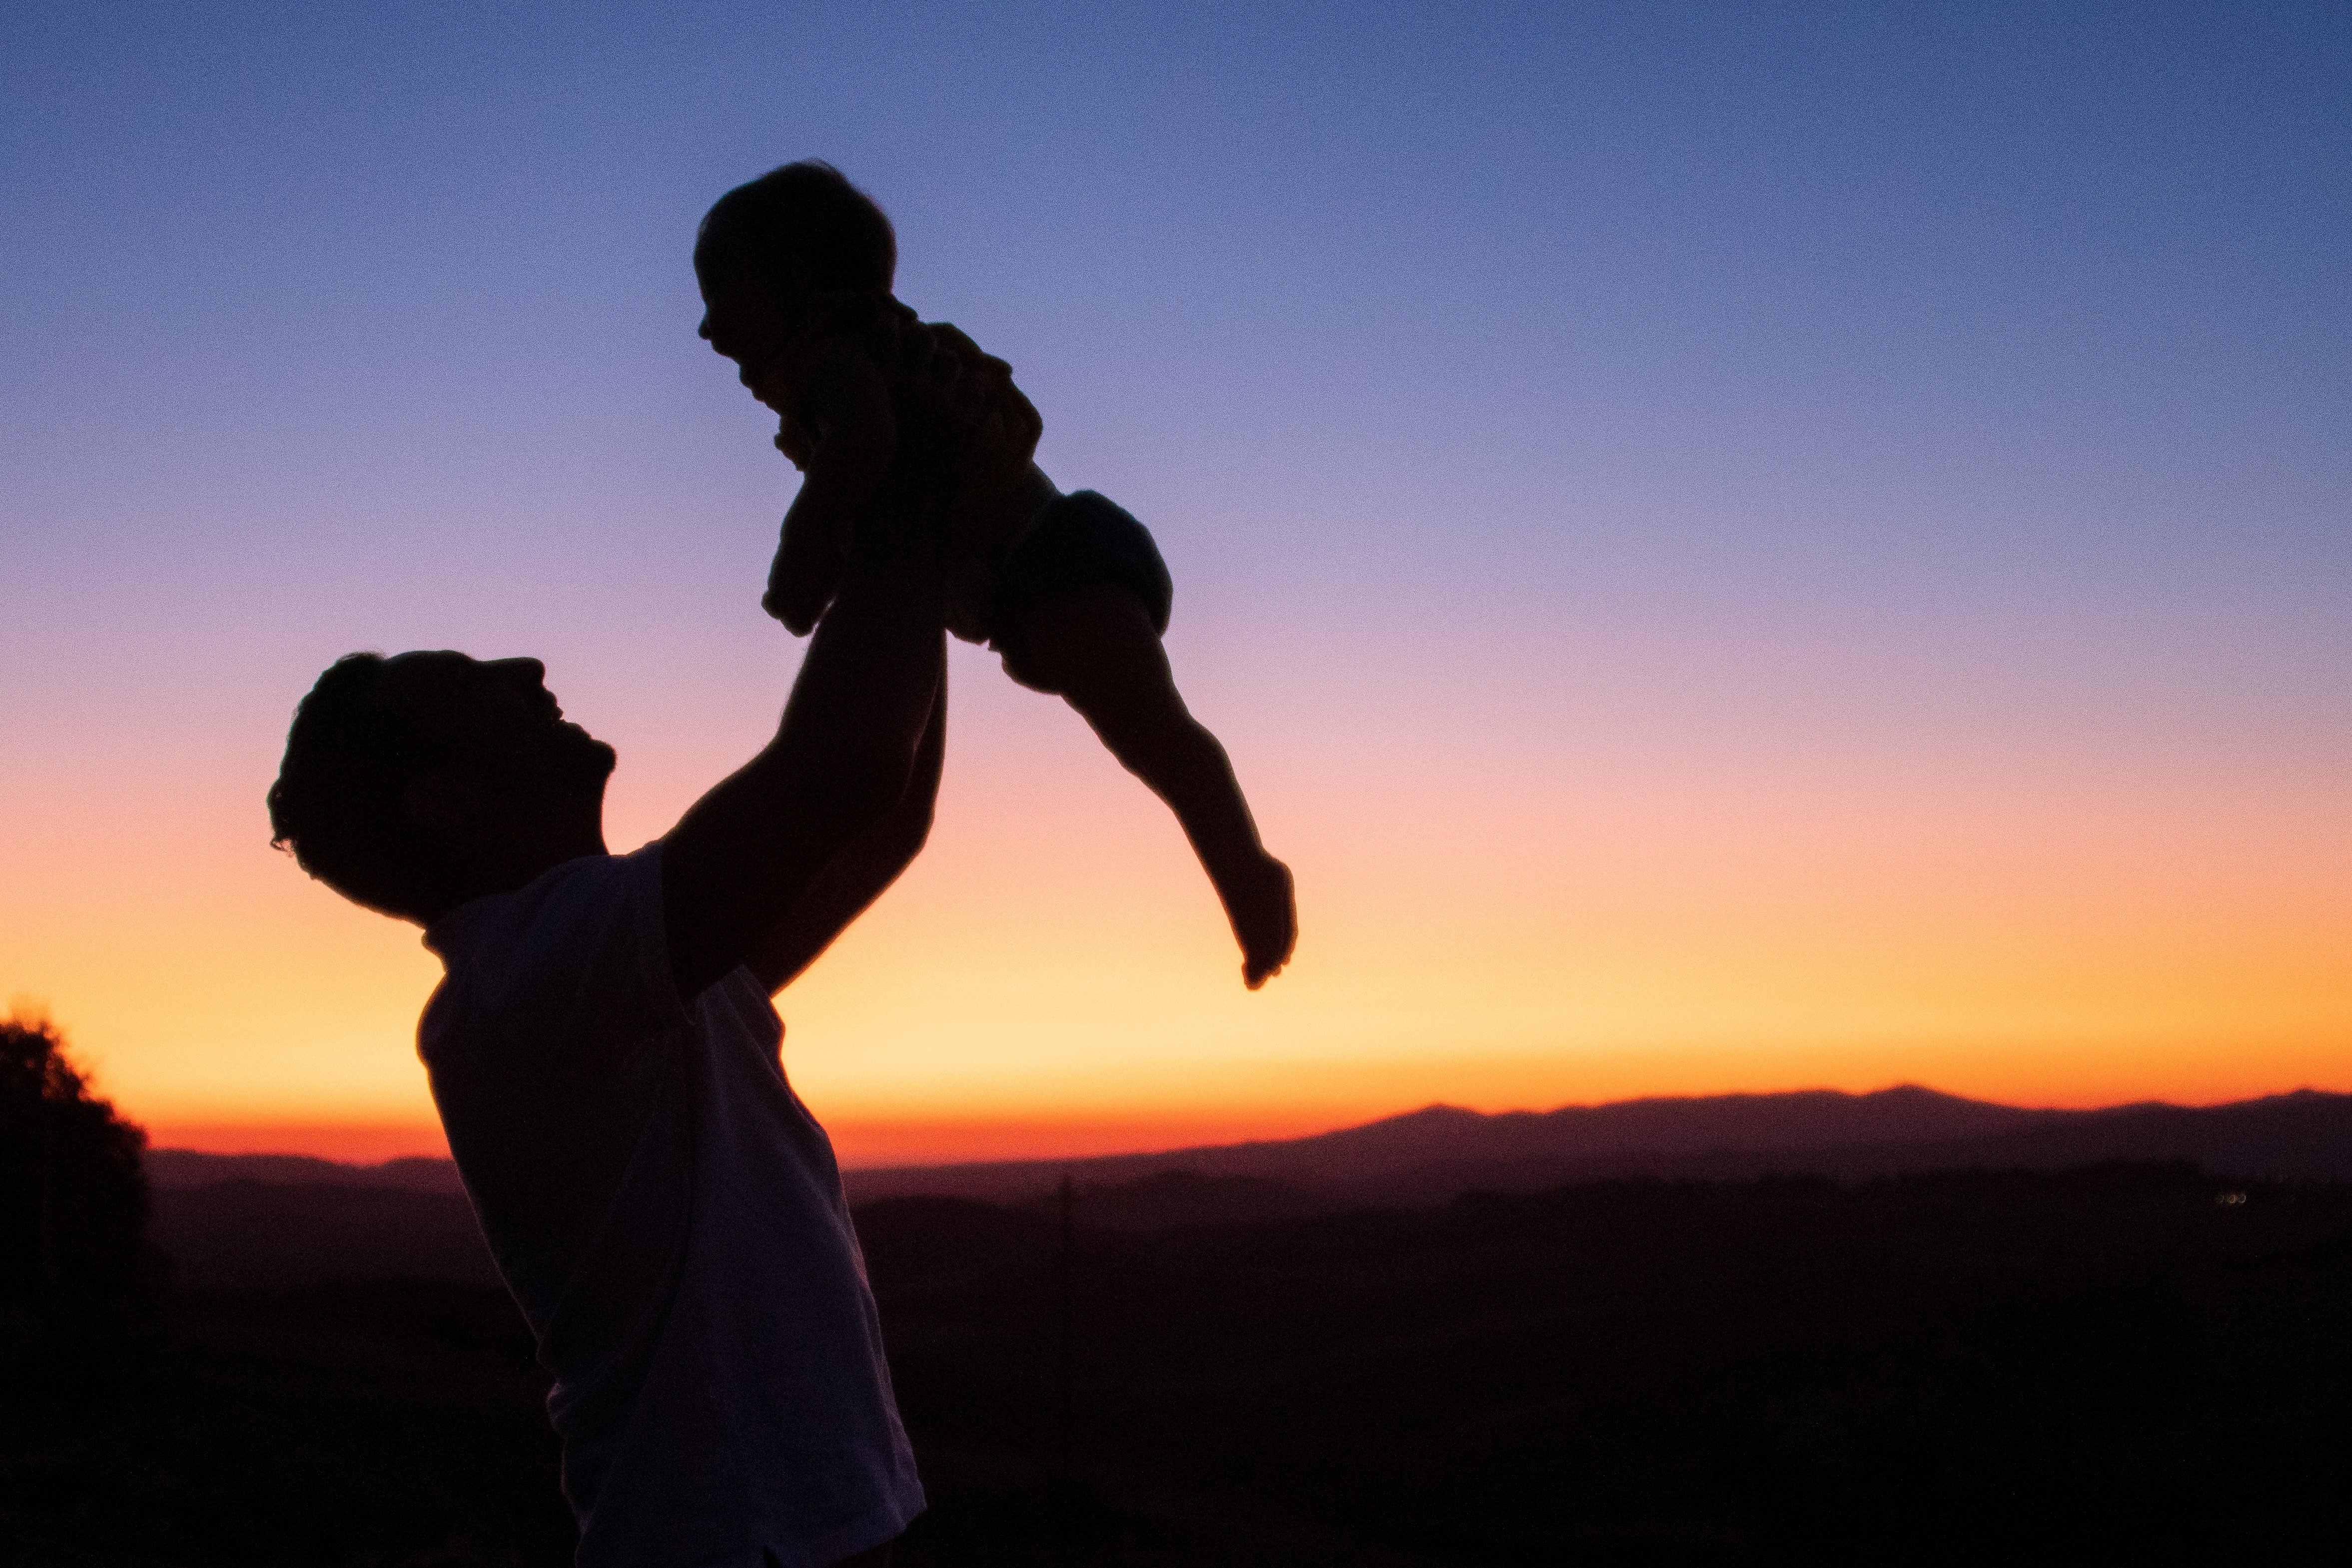 The test results declared OP as the baby's father | Source: Unsplash